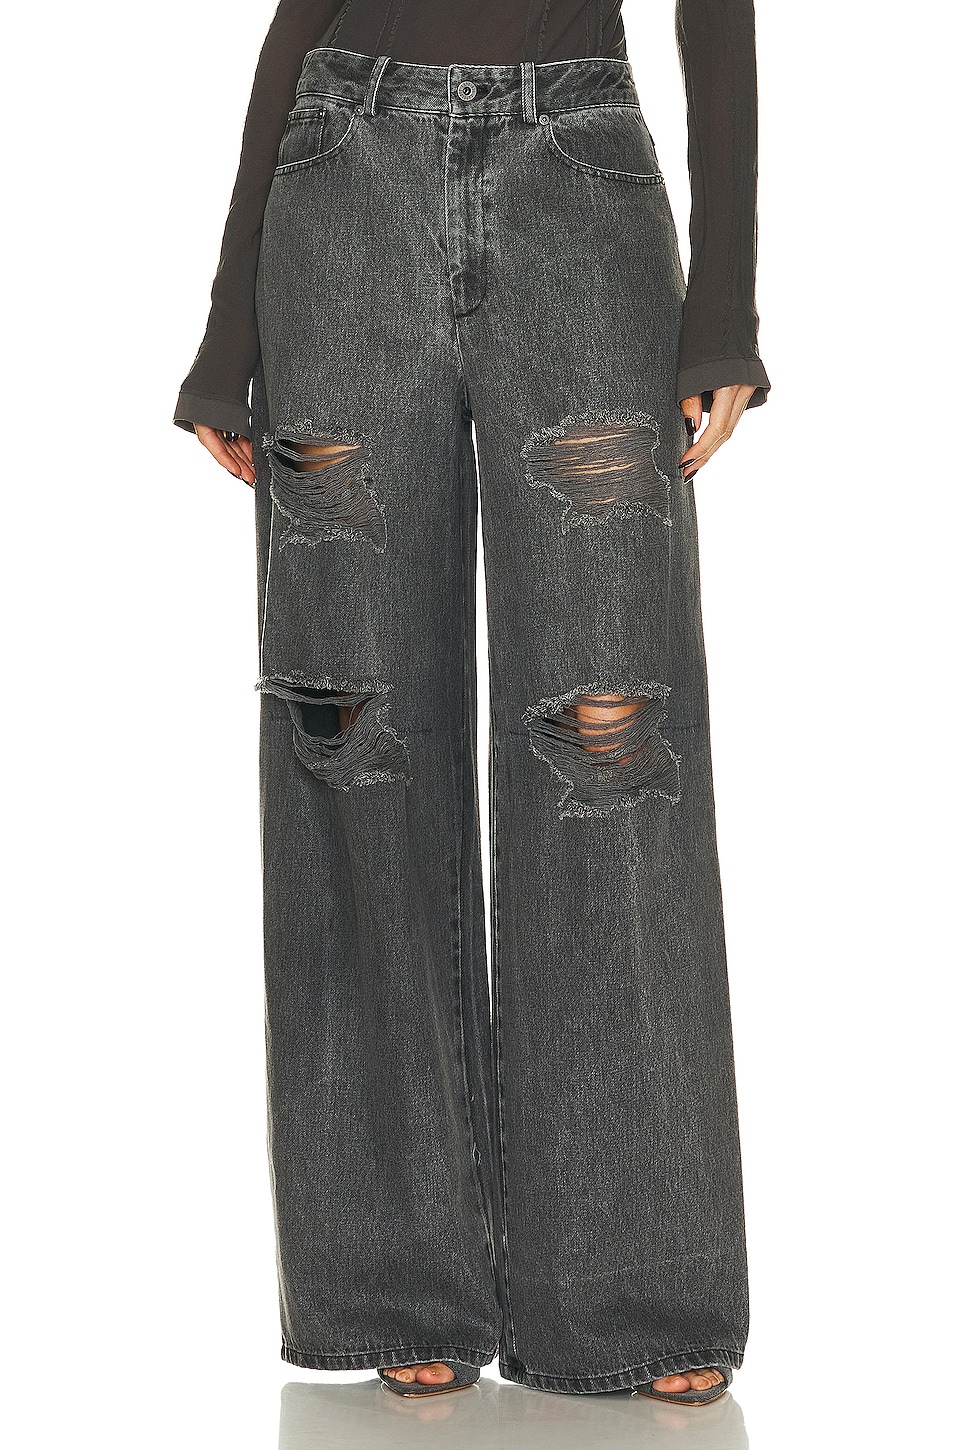 Image 1 of Lapointe Washed Denim Distressed High Waist Jean in Steel